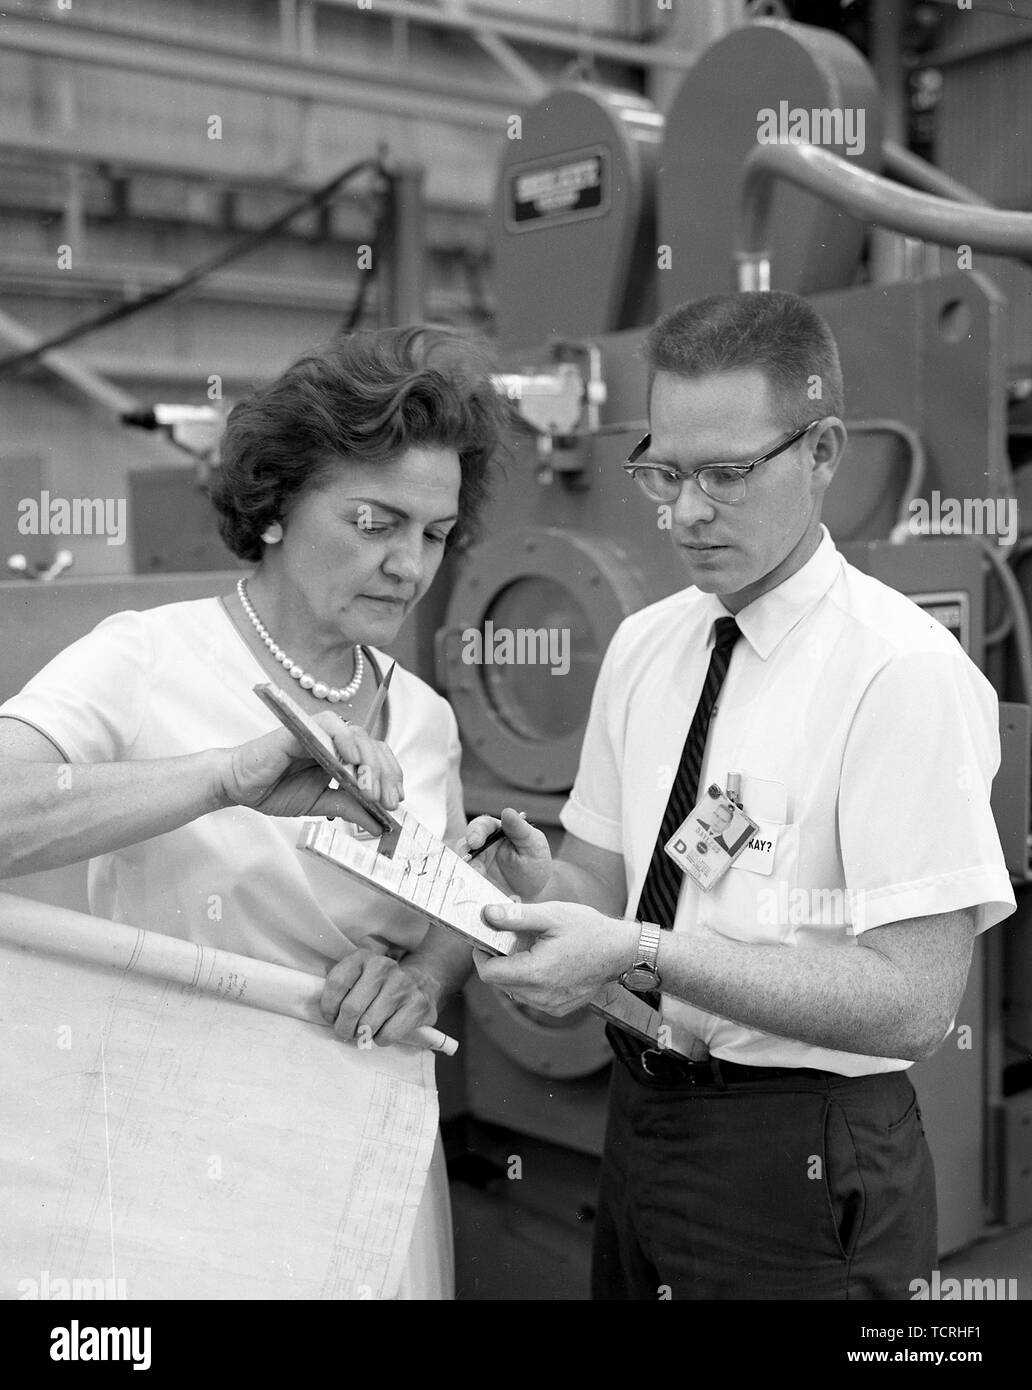 Margaret W. ‘Hap’ Brennecke was the first female welding engineer to work in the Materials and Processes Laboratory at NASA’s Marshall Space Flight Center. Stock Photo